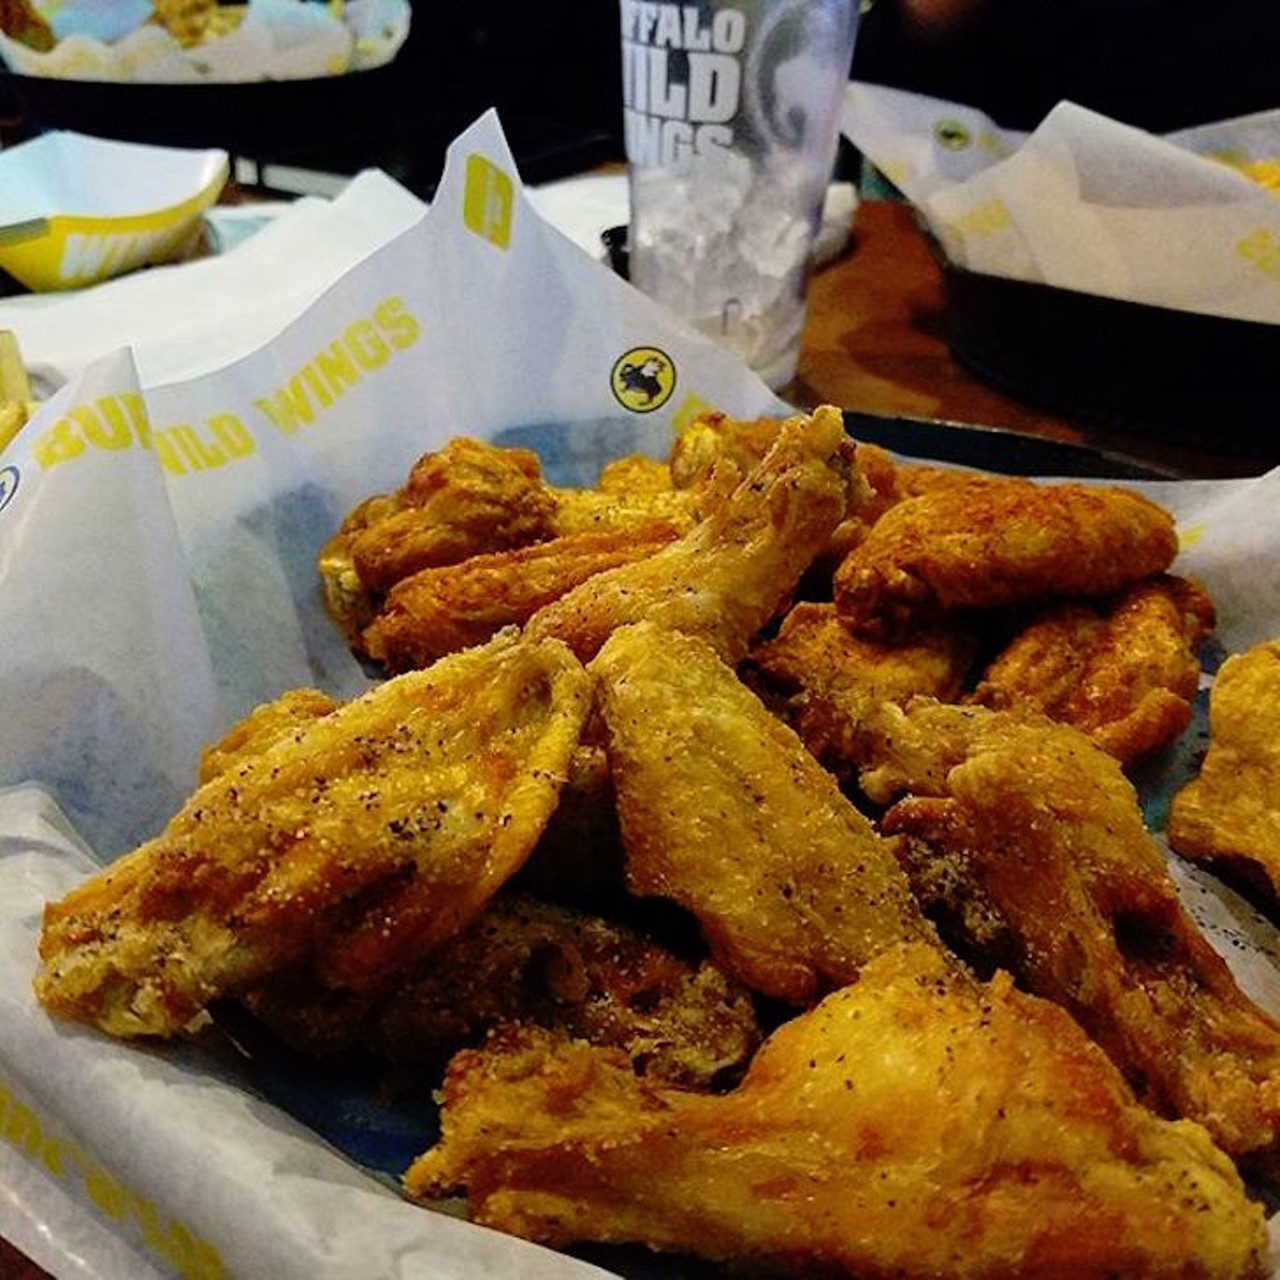 Buffalo Wild Wings
11400 University Blvd.; 504 N. Alafaya Trail, Suite 102
As you know, Buffalo Wild Wings is known for its...you guessed it...wings. They&#146;re so good that there are actually two Buffalo Wild Wings locations in the UCF area. Make sure to go on Wing Tuesdays, where you can get $0.75 traditional wings. 
Photo via eggie83/Instagram